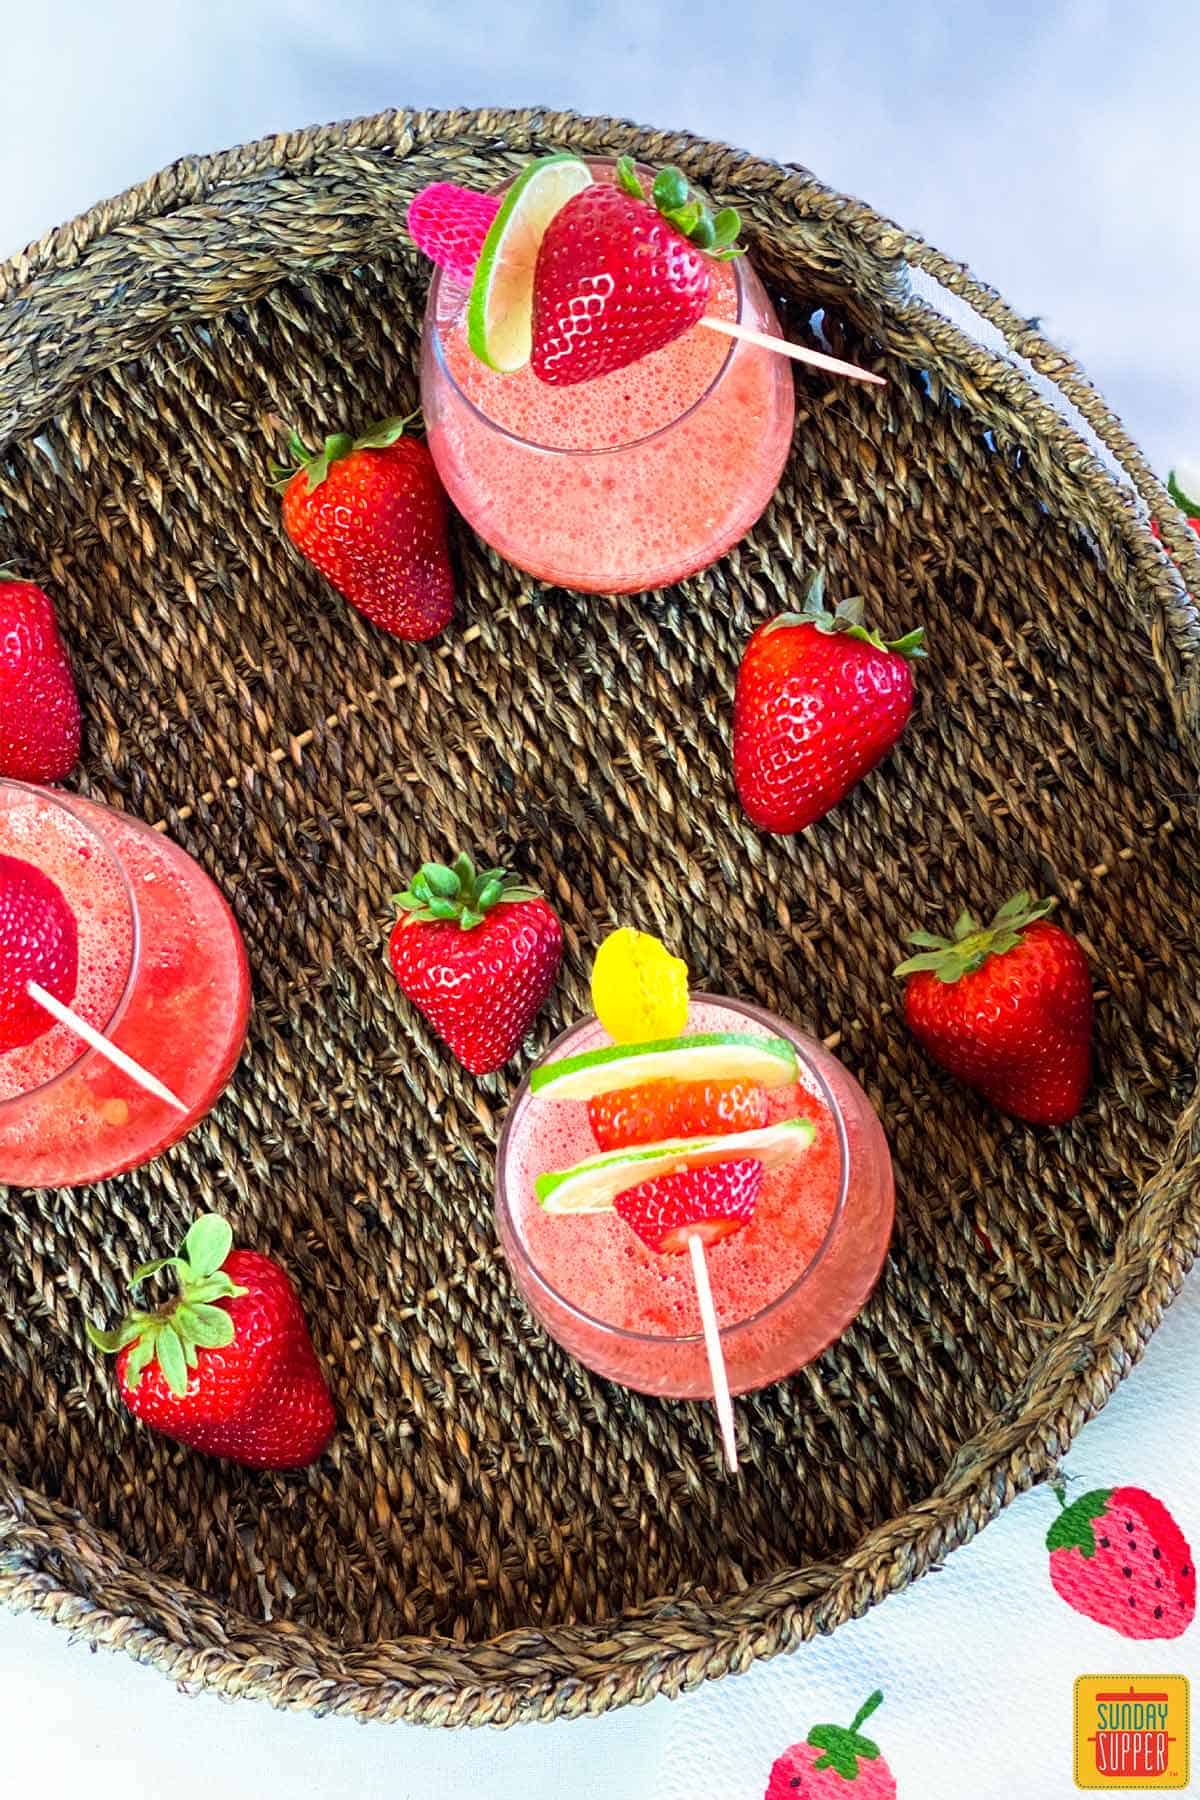 Overhead shot of three strawberry daiquiri glasses with fruit skewered on top